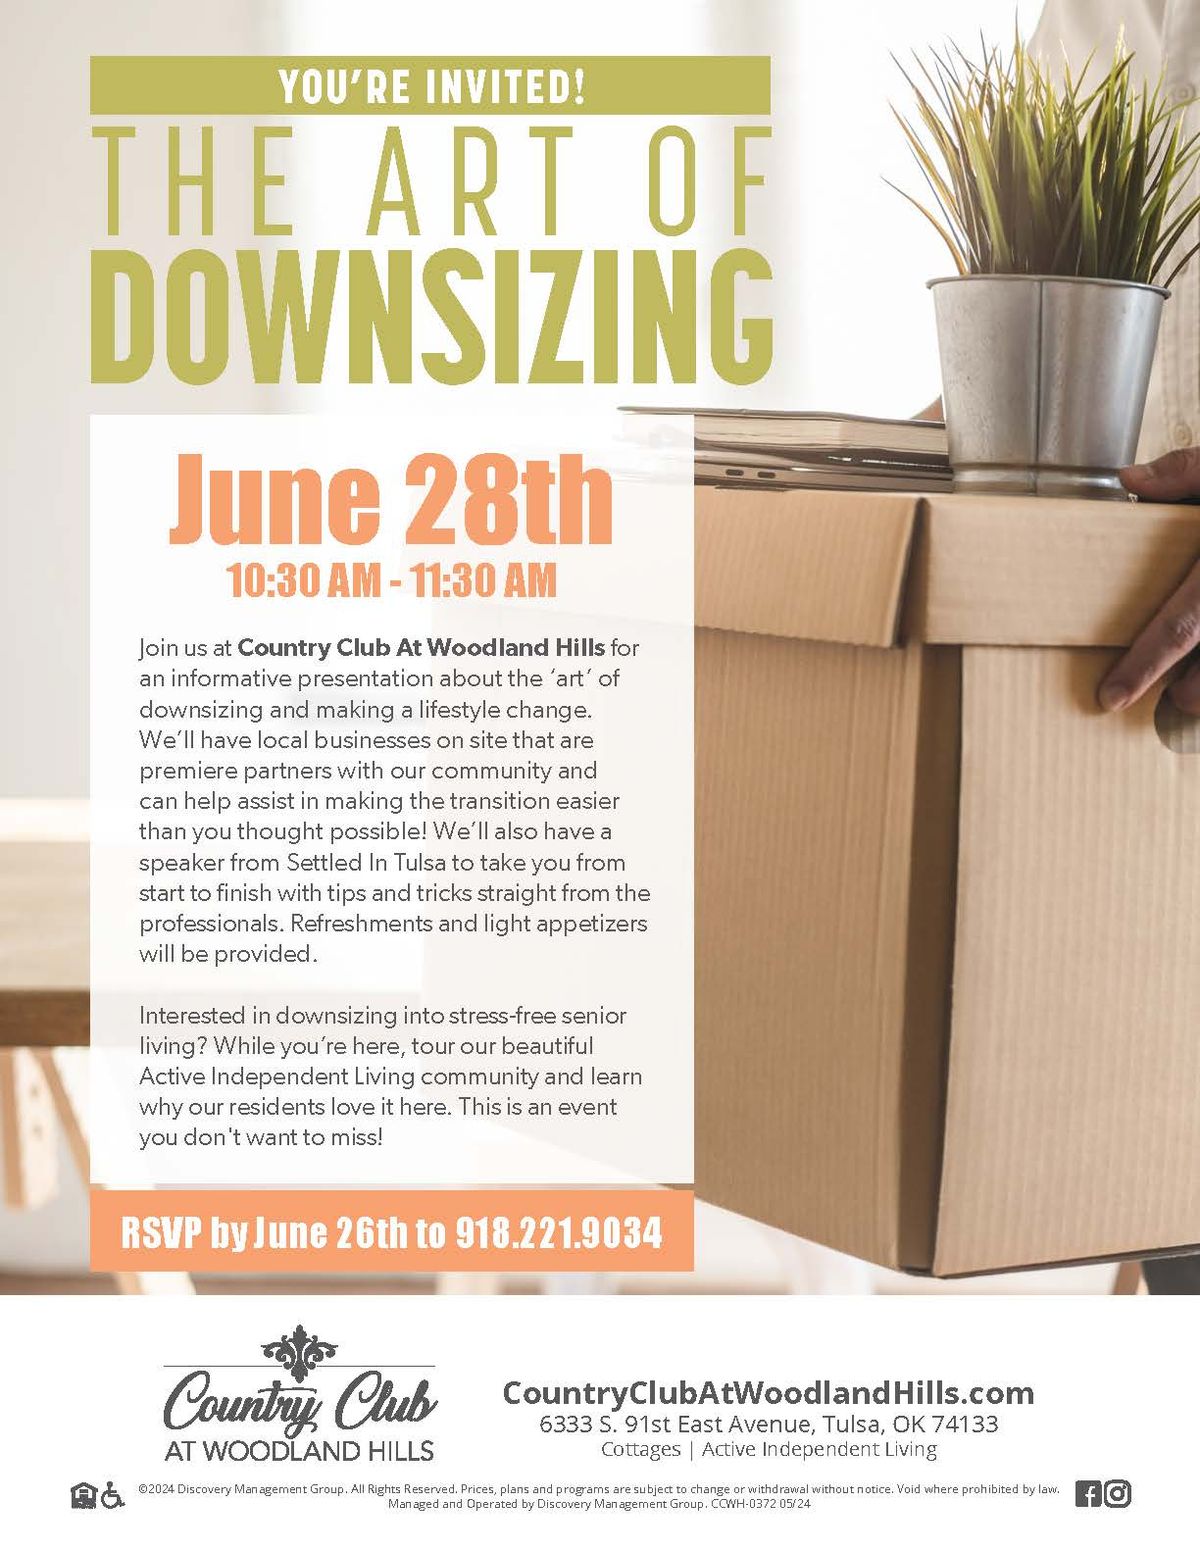 The Art of Downsizing